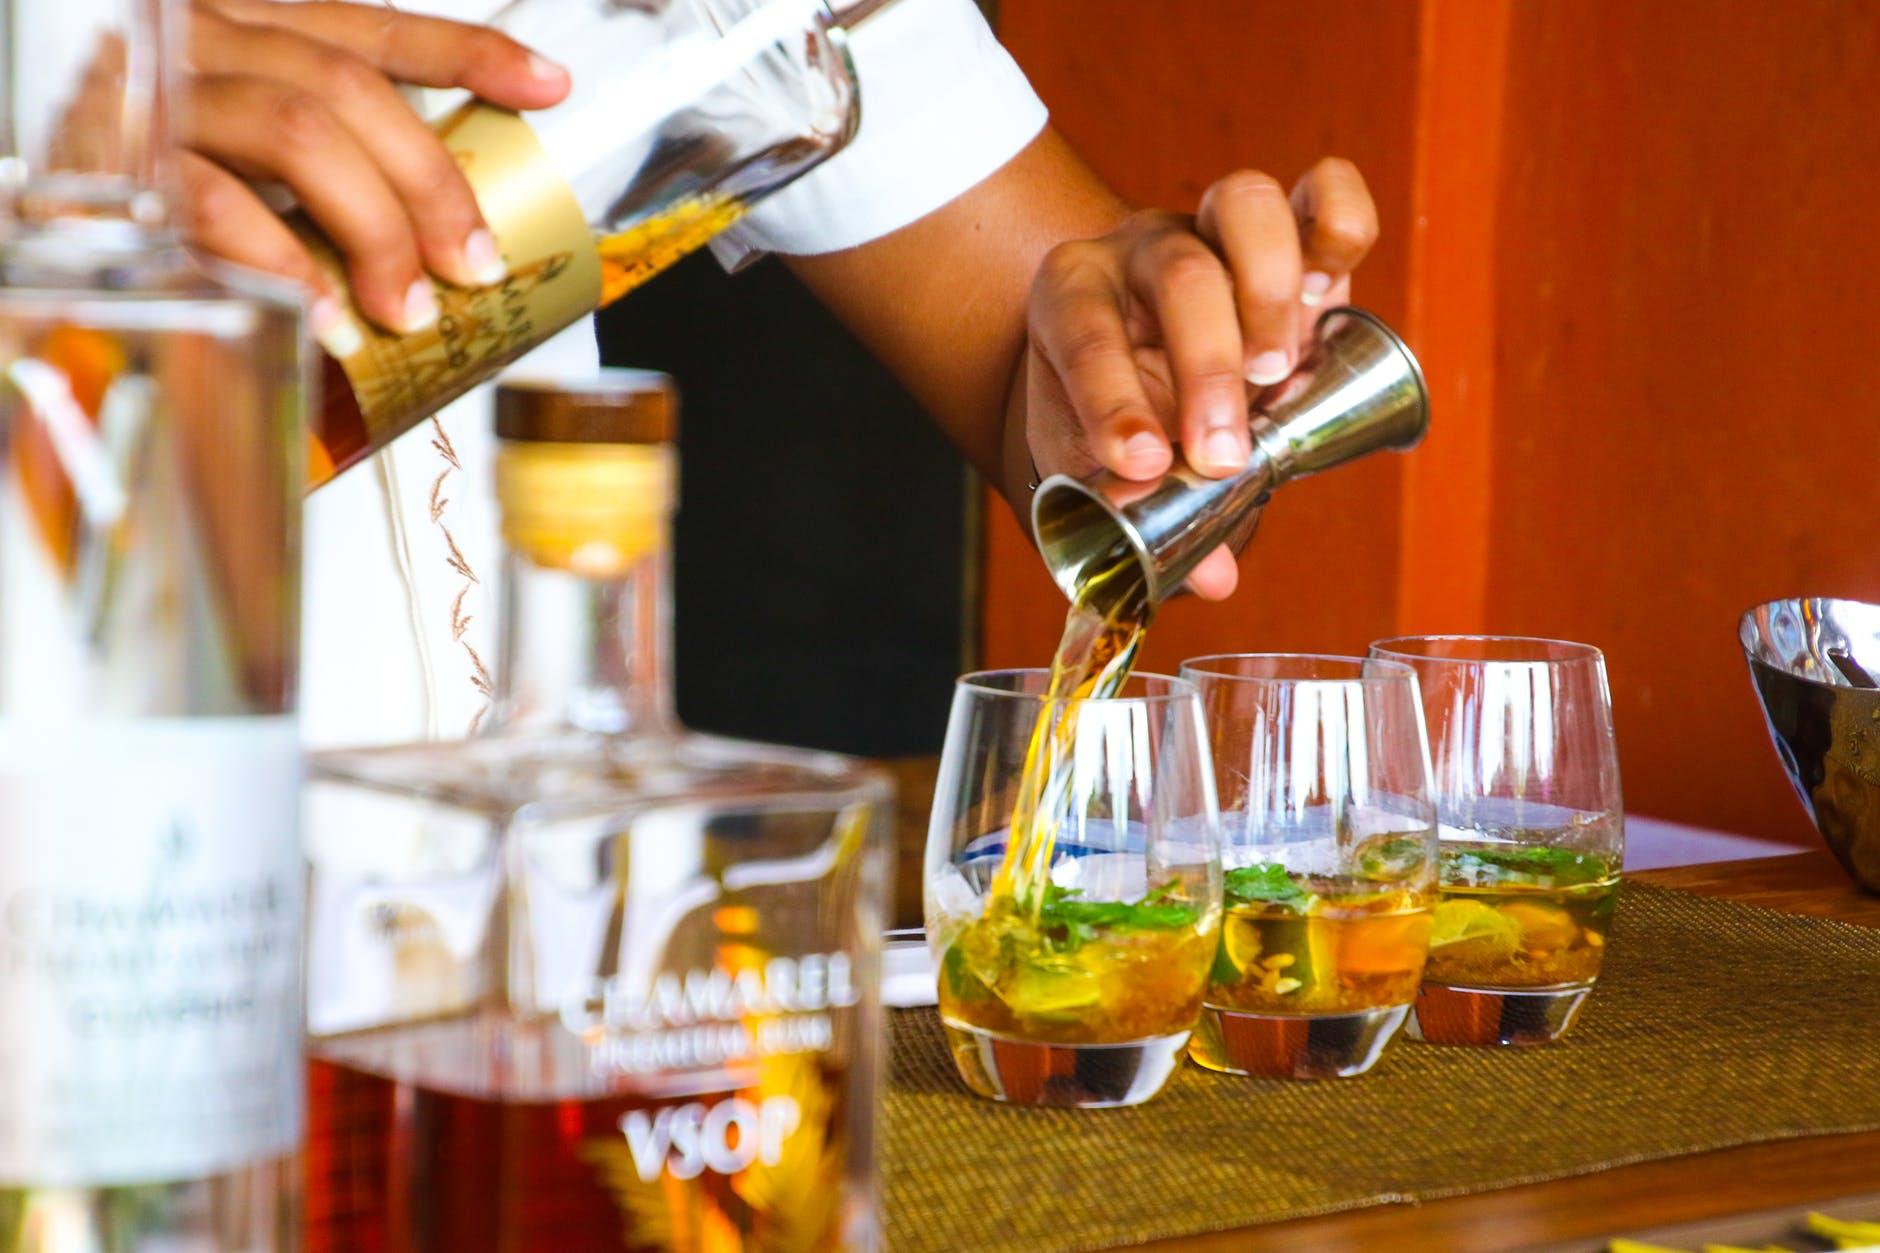 Do you need training to be a bartender?